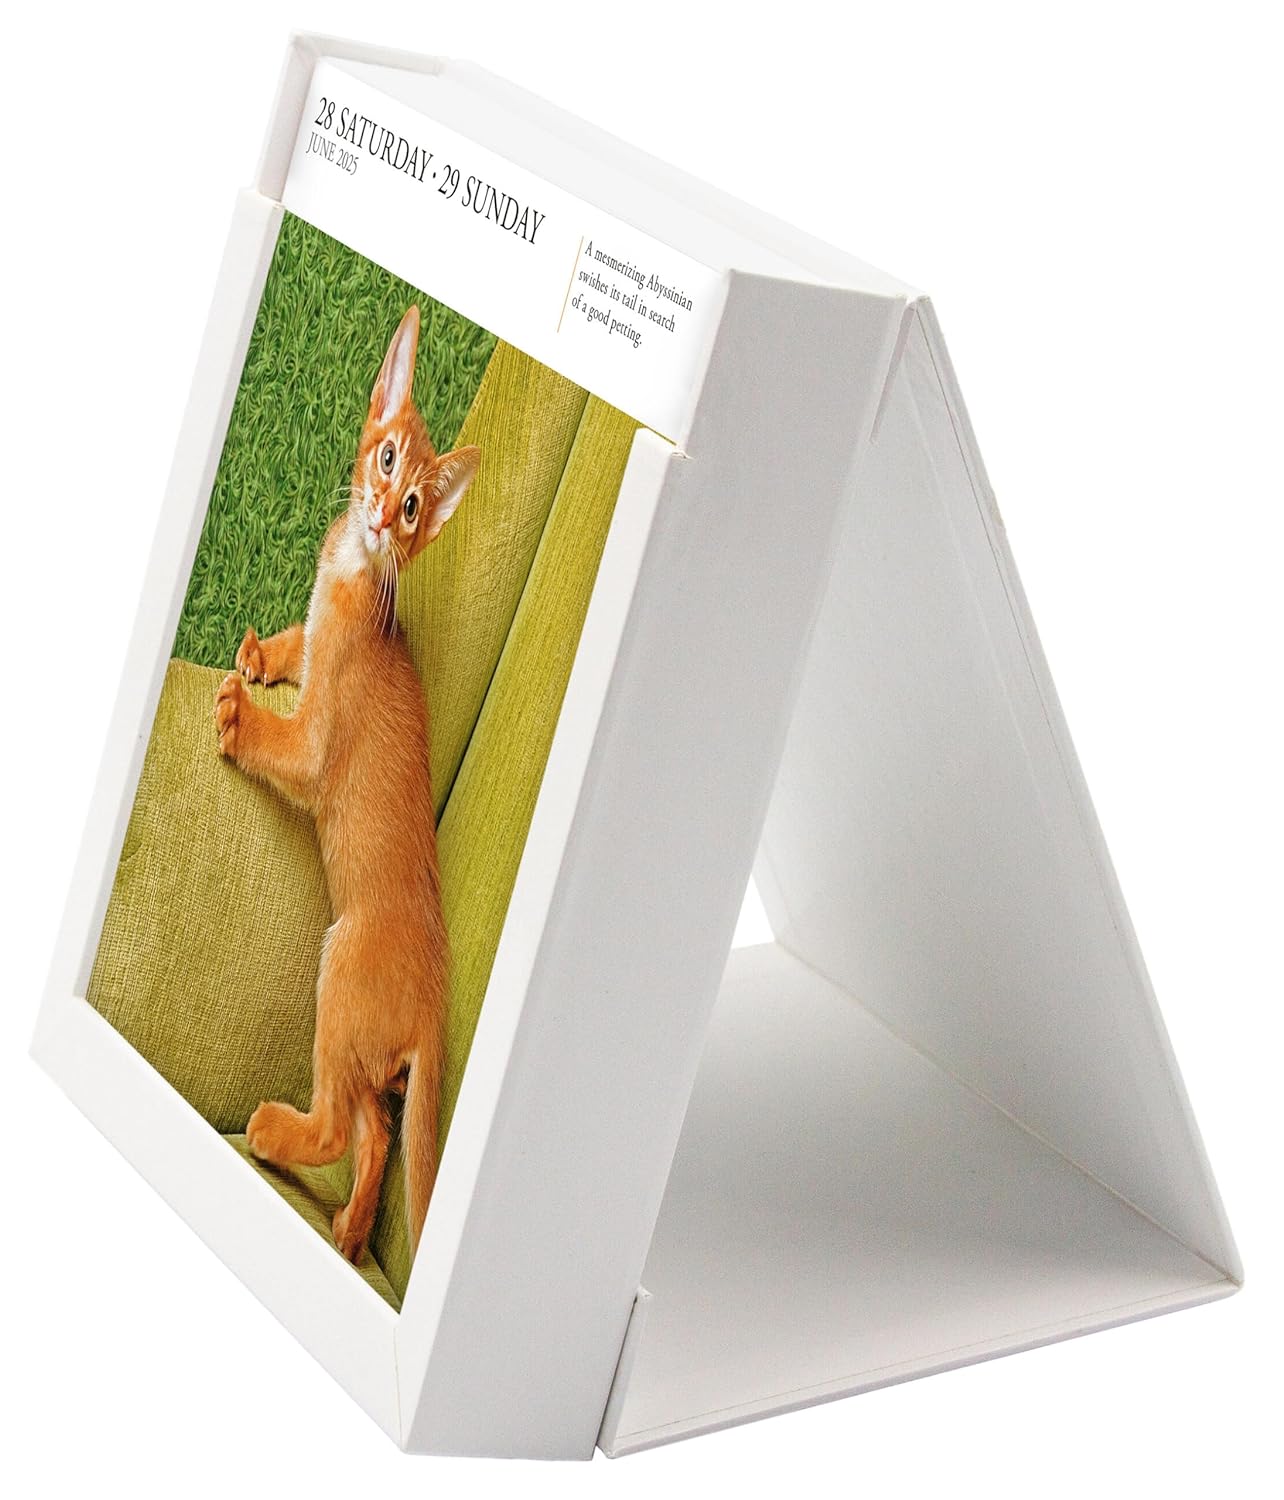 2025 Cat - Daily Boxed Page-A-Day Calendar